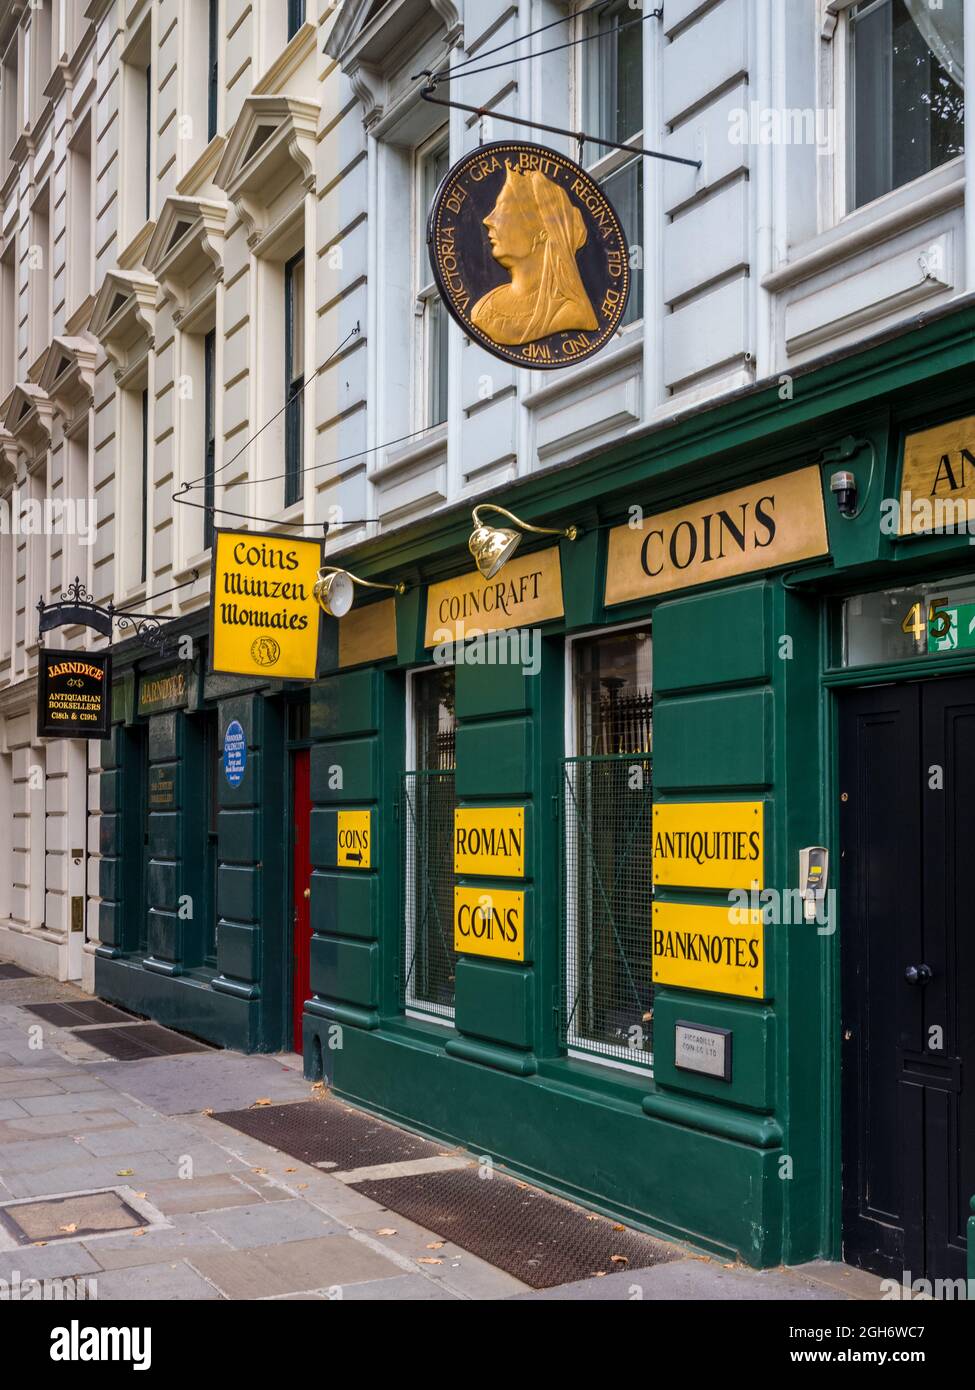 Coincraft Coin Dealers Store at 45 Great Russell St Bloomsbury opposite the British Museum. Established in 1955. Stock Photo